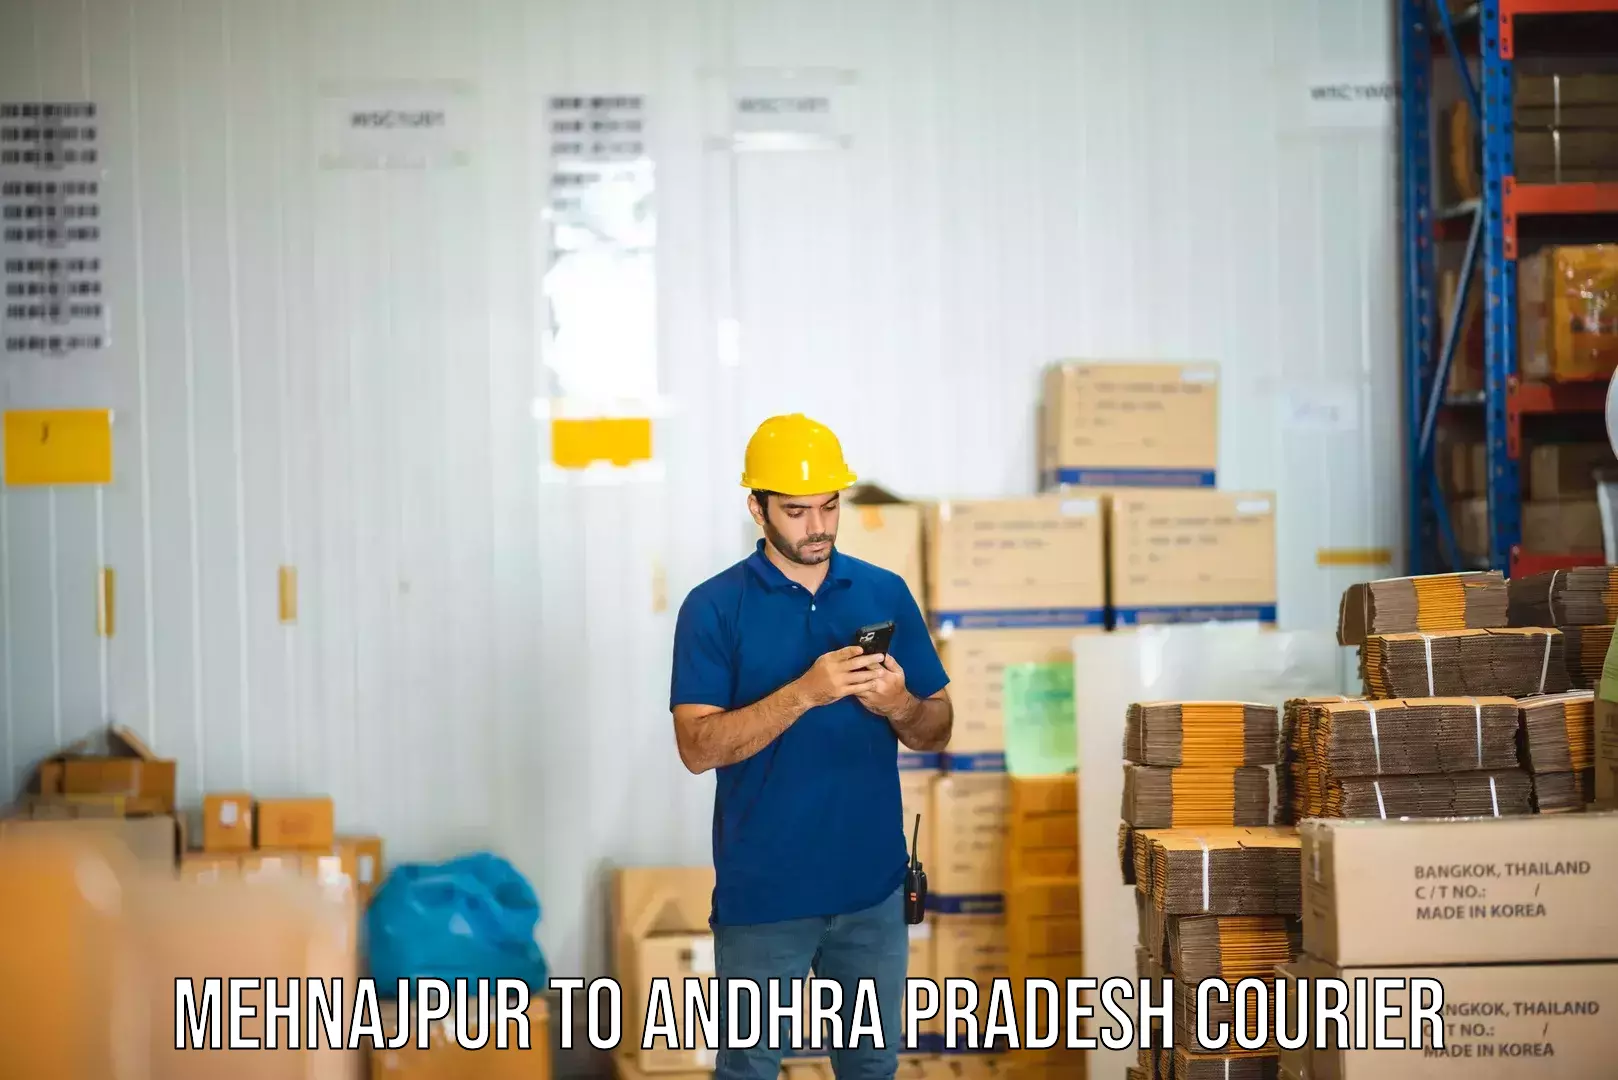 State-of-the-art courier technology Mehnajpur to Challapalli